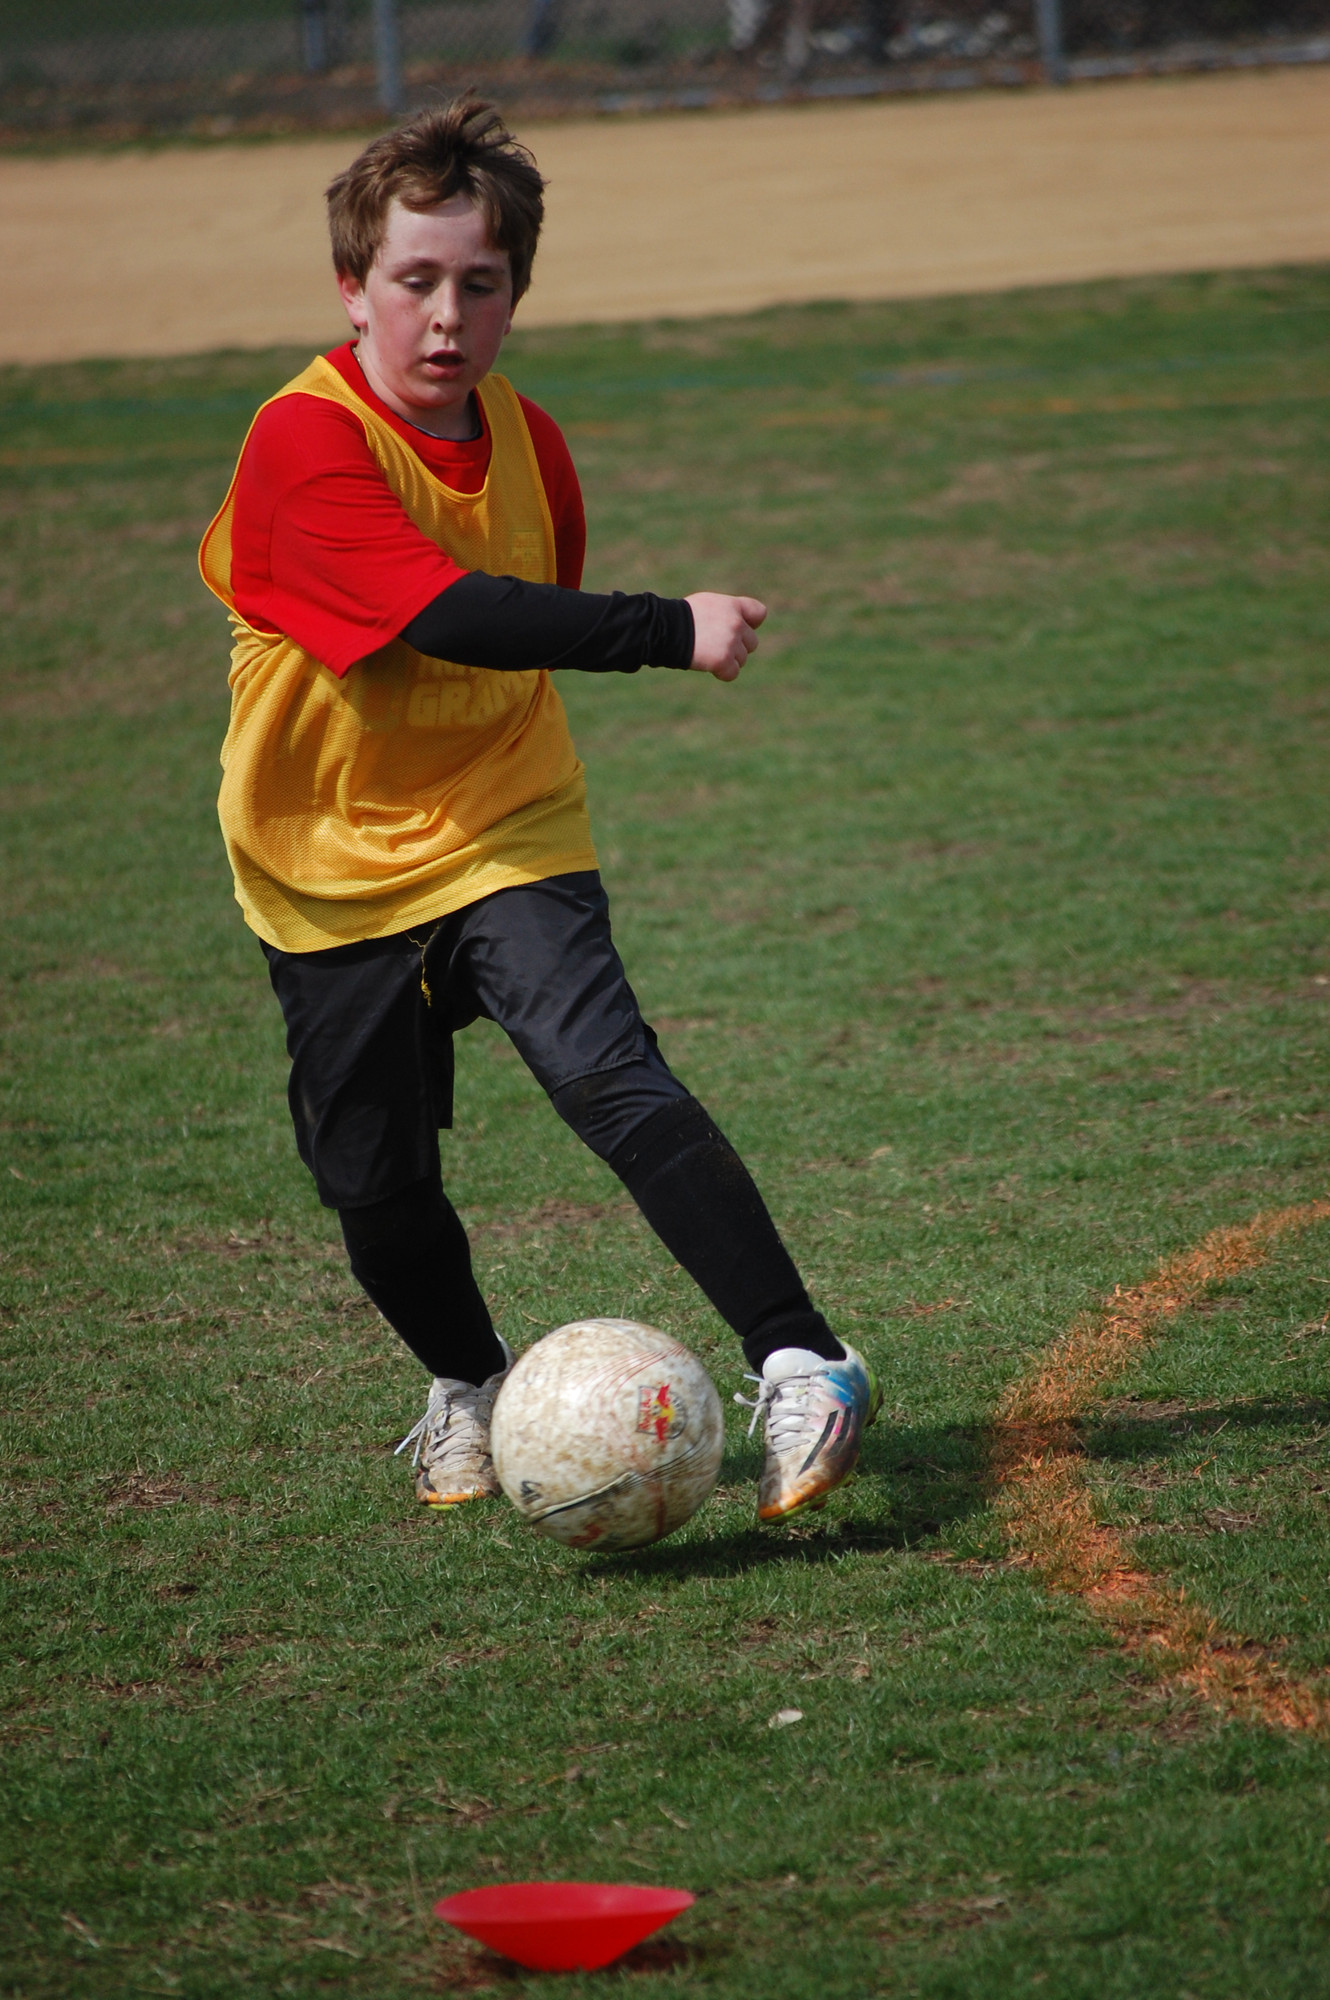 Fletcher Goodman, 10, a student at Ogden Elementary School, showed off his footwork during the soccer clinic.